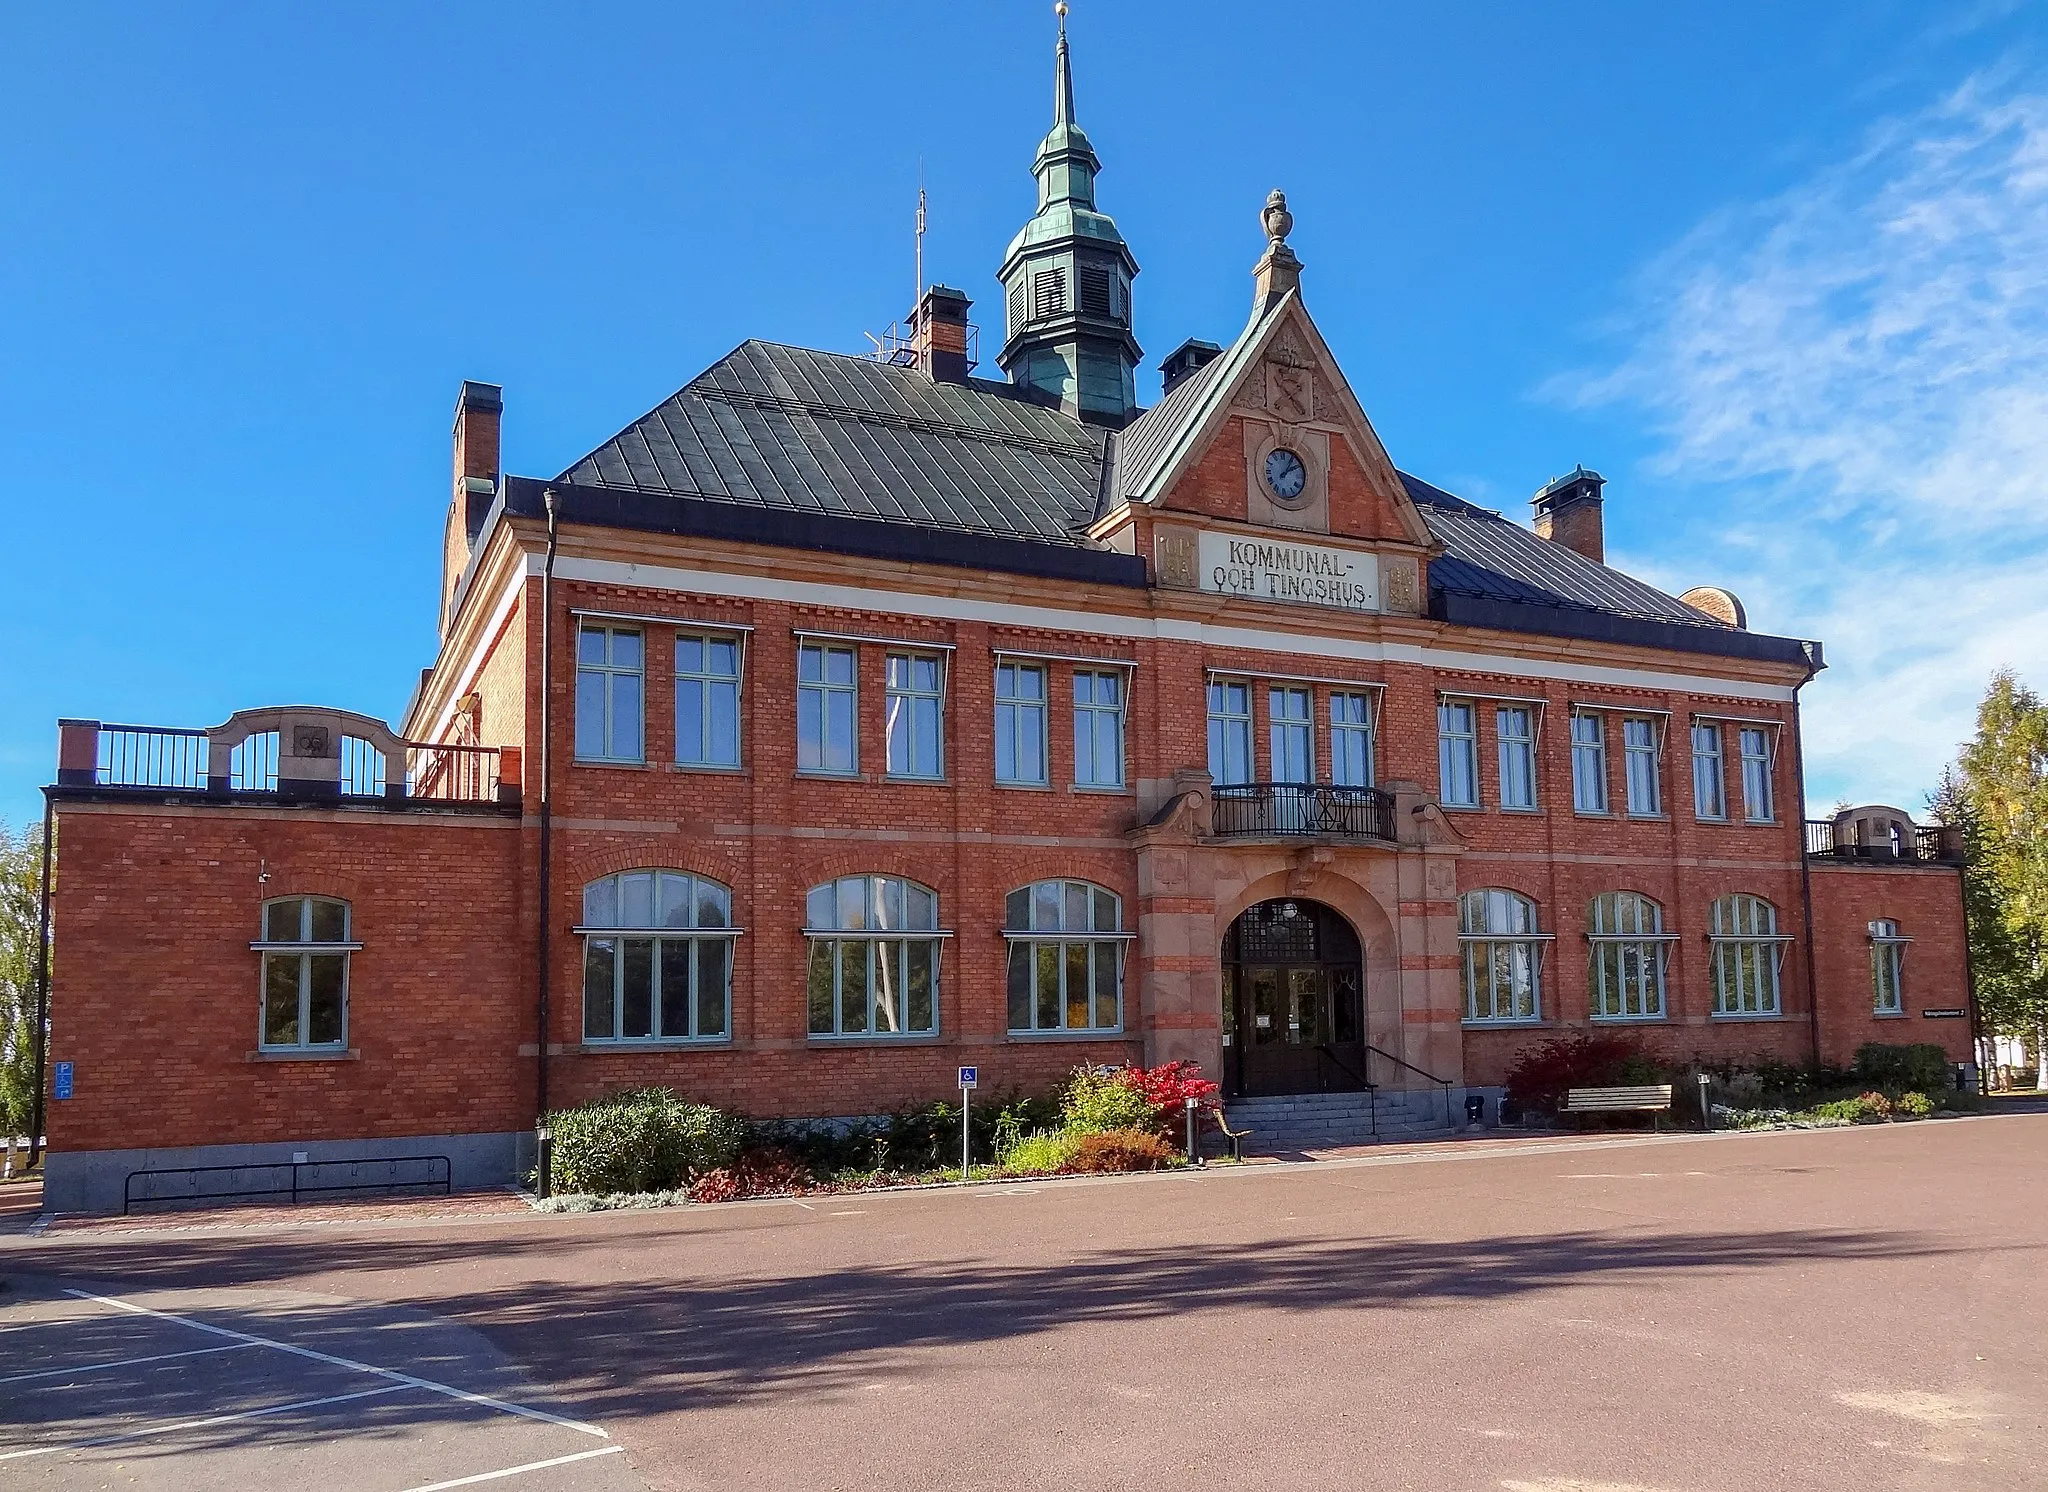 Photo showing: Townhall in Orsa, Dalarna county, Sweden